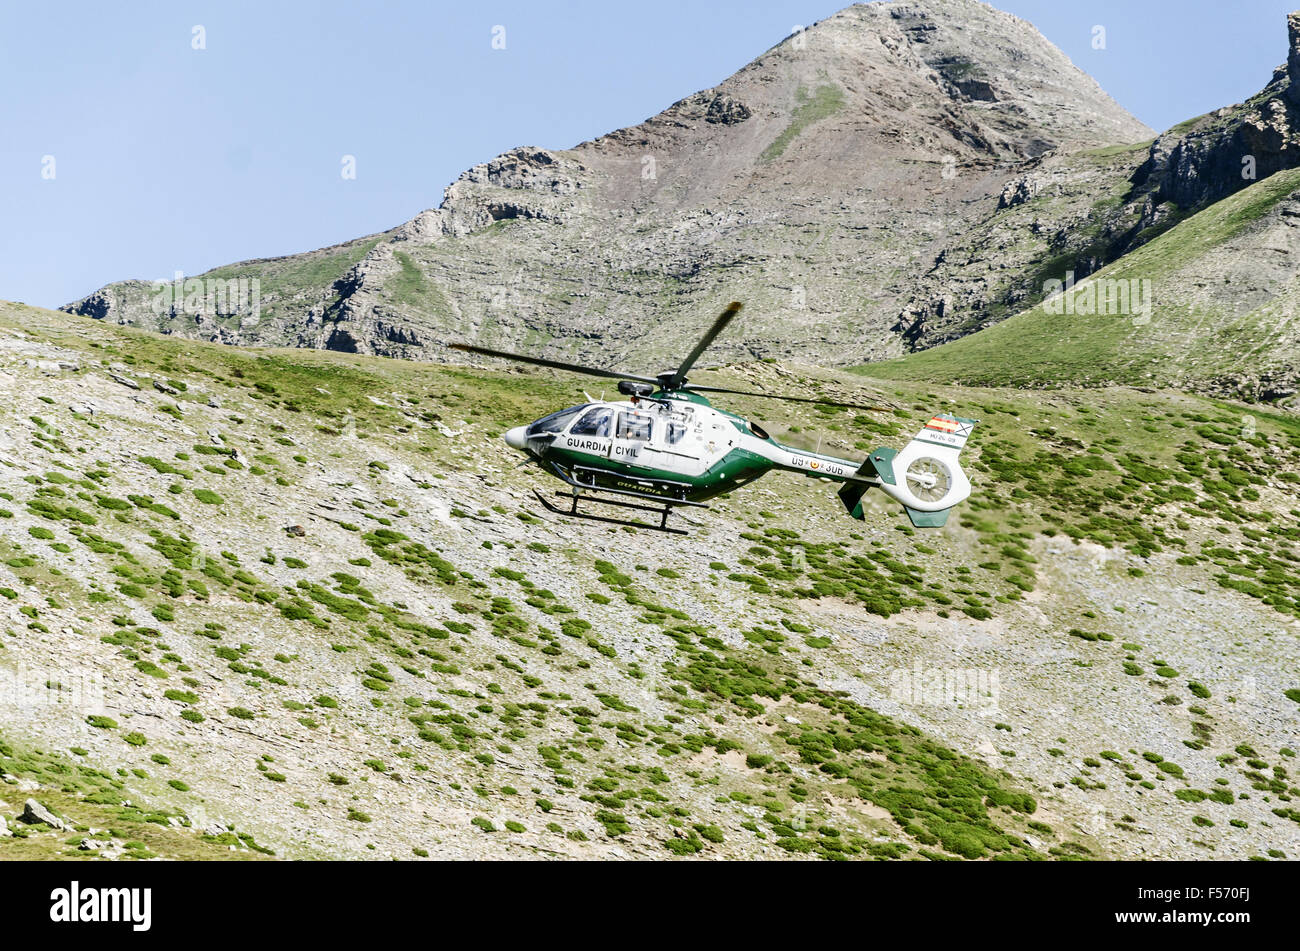 Chopper of Guardia civil patrulling over the mountain in Spain Stock Photo